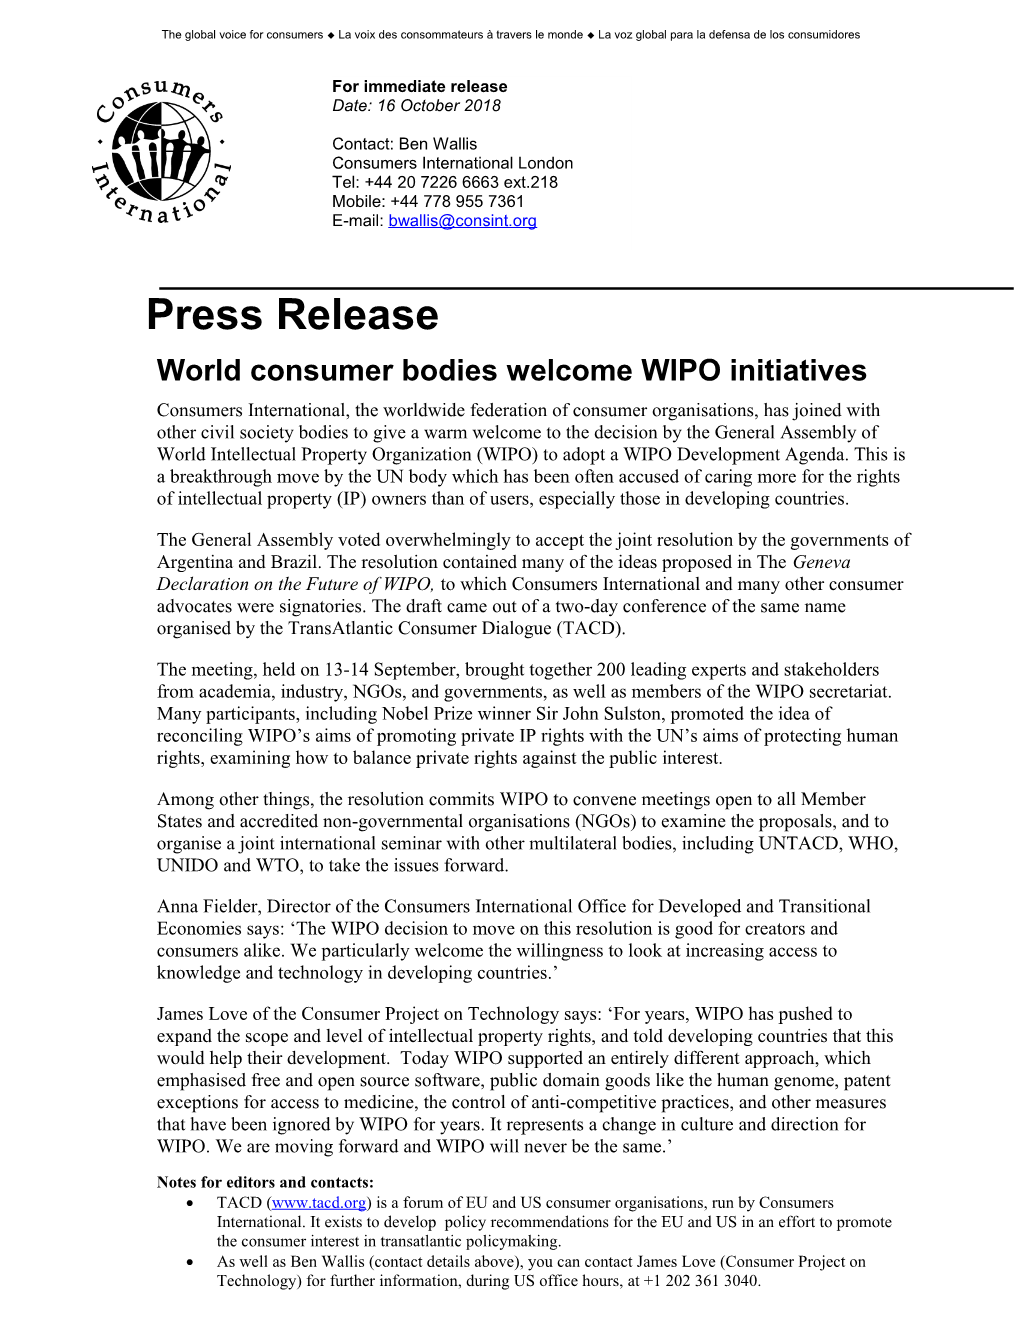 World Consumer Bodies Welcome WIPO Initiatives